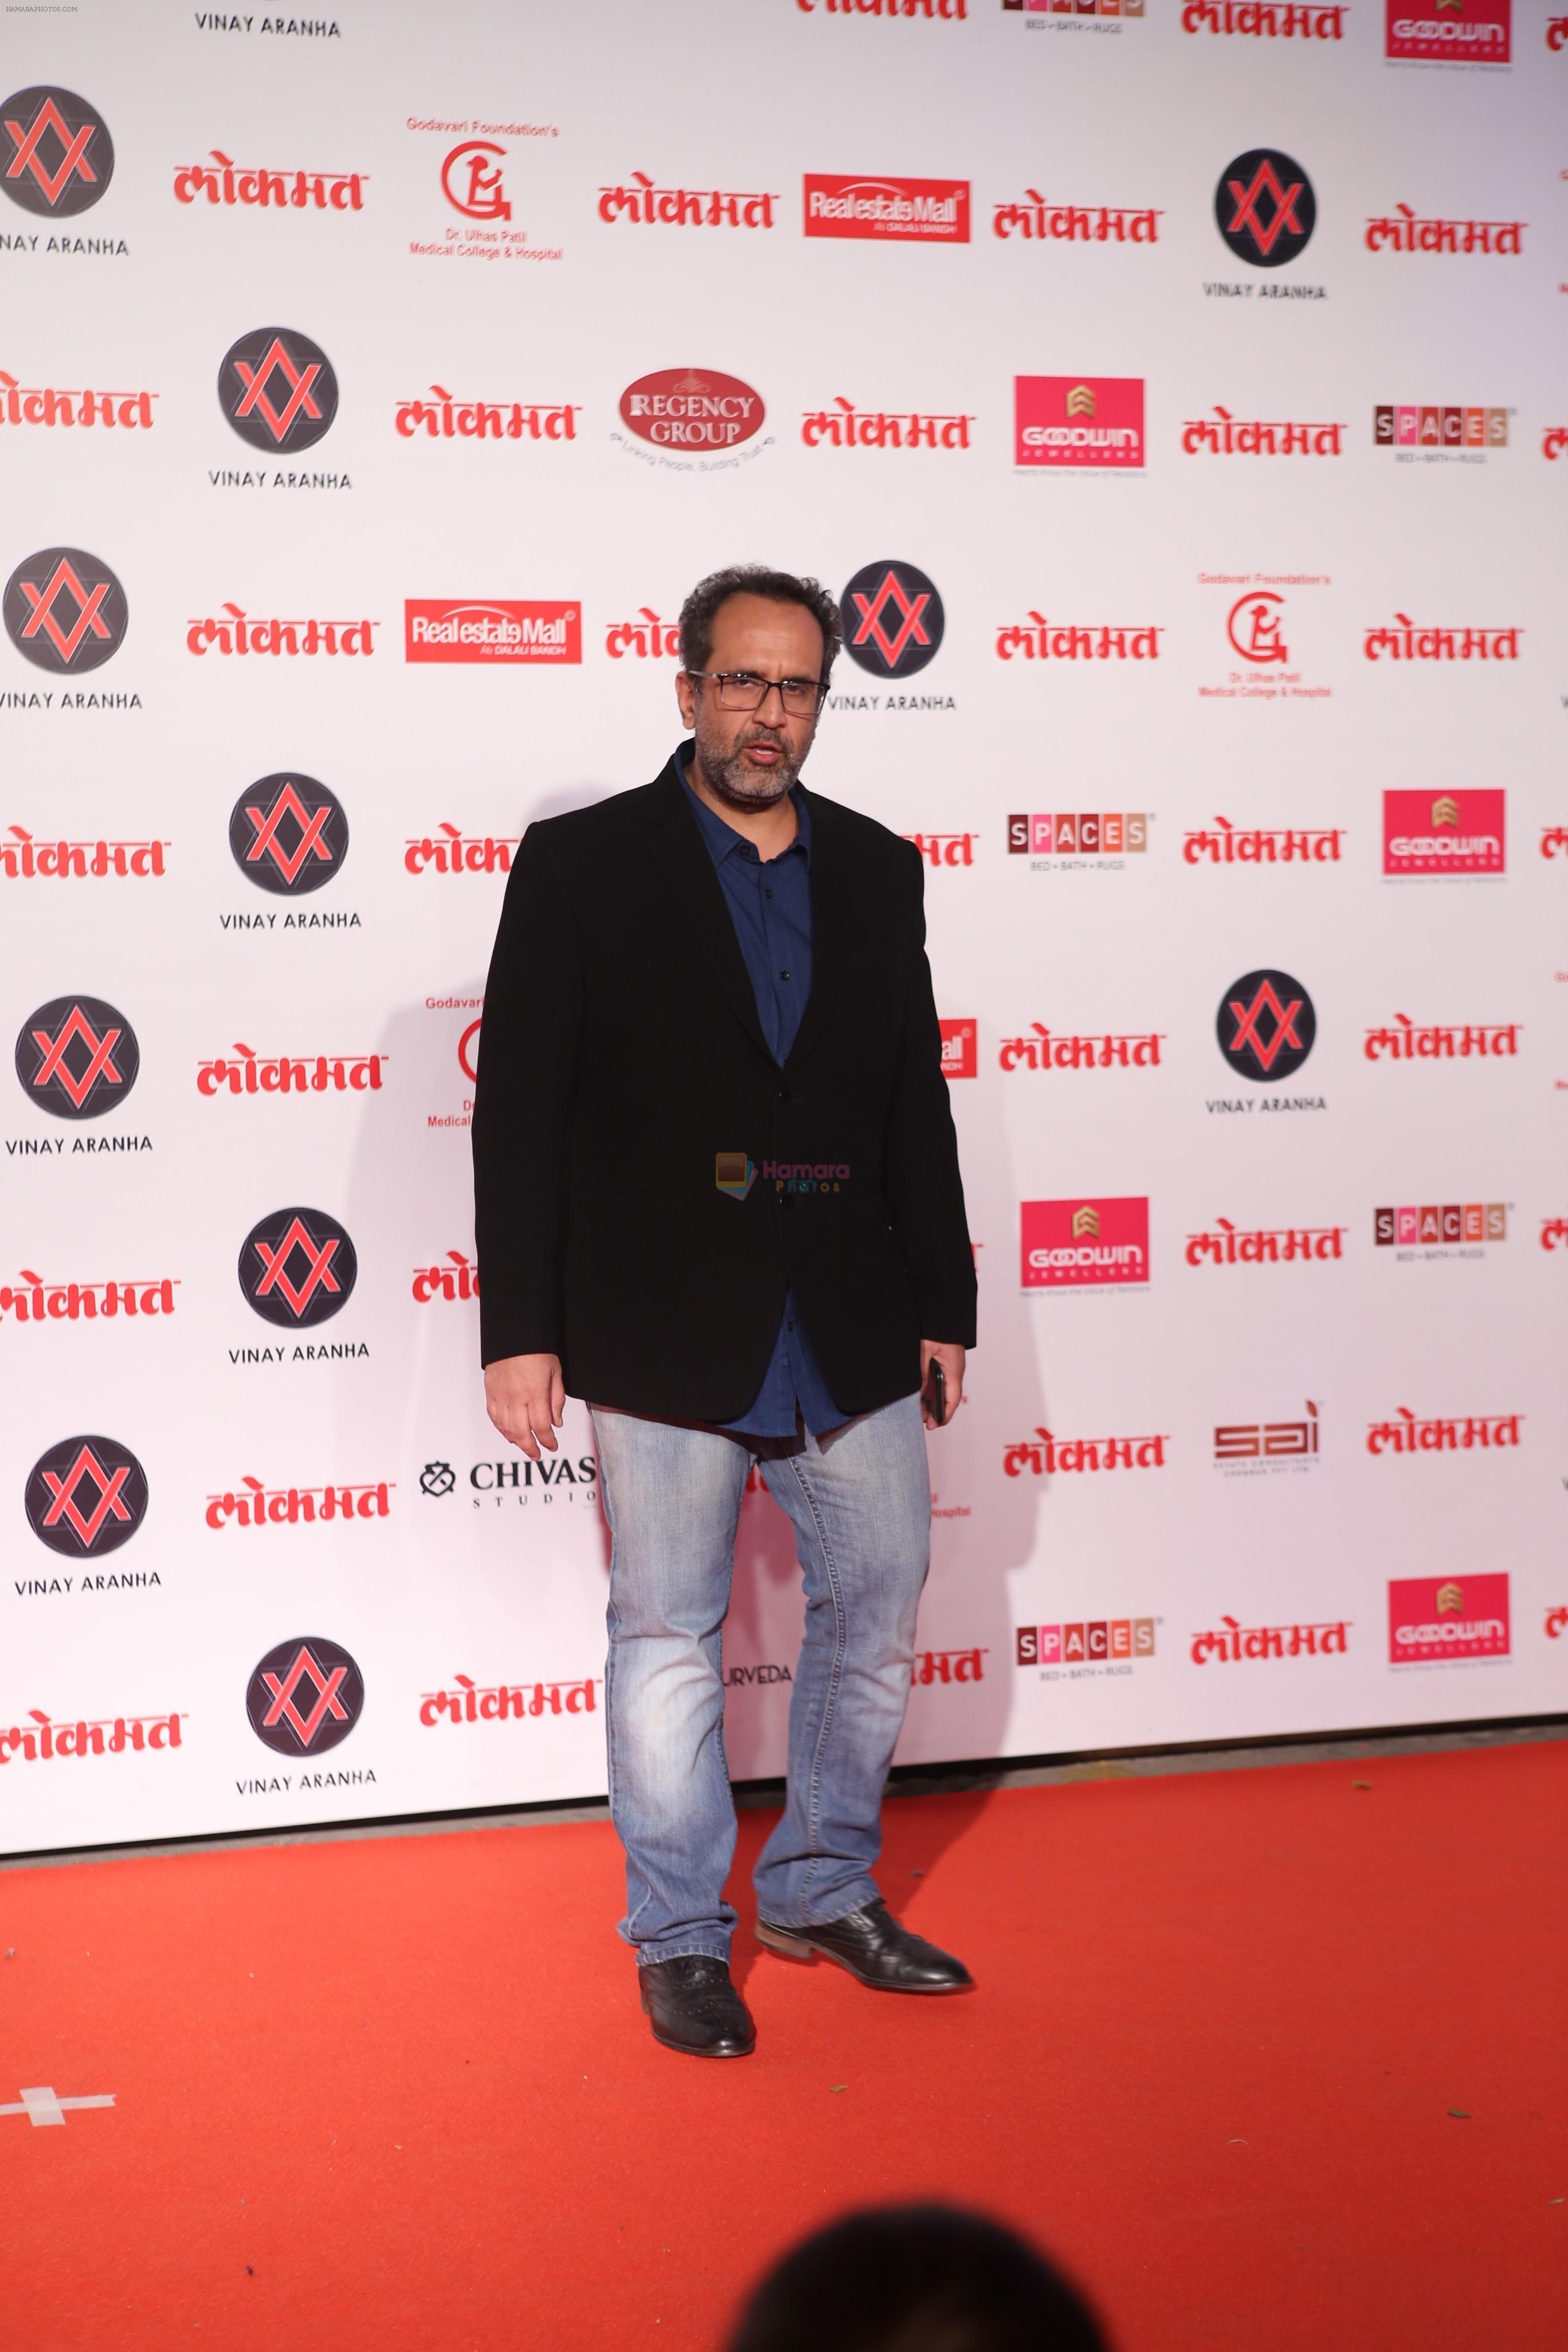 Anand L Rai at Lokmat Most Stylish Awards in The Leela hotel andheri on 19th Dec 2018